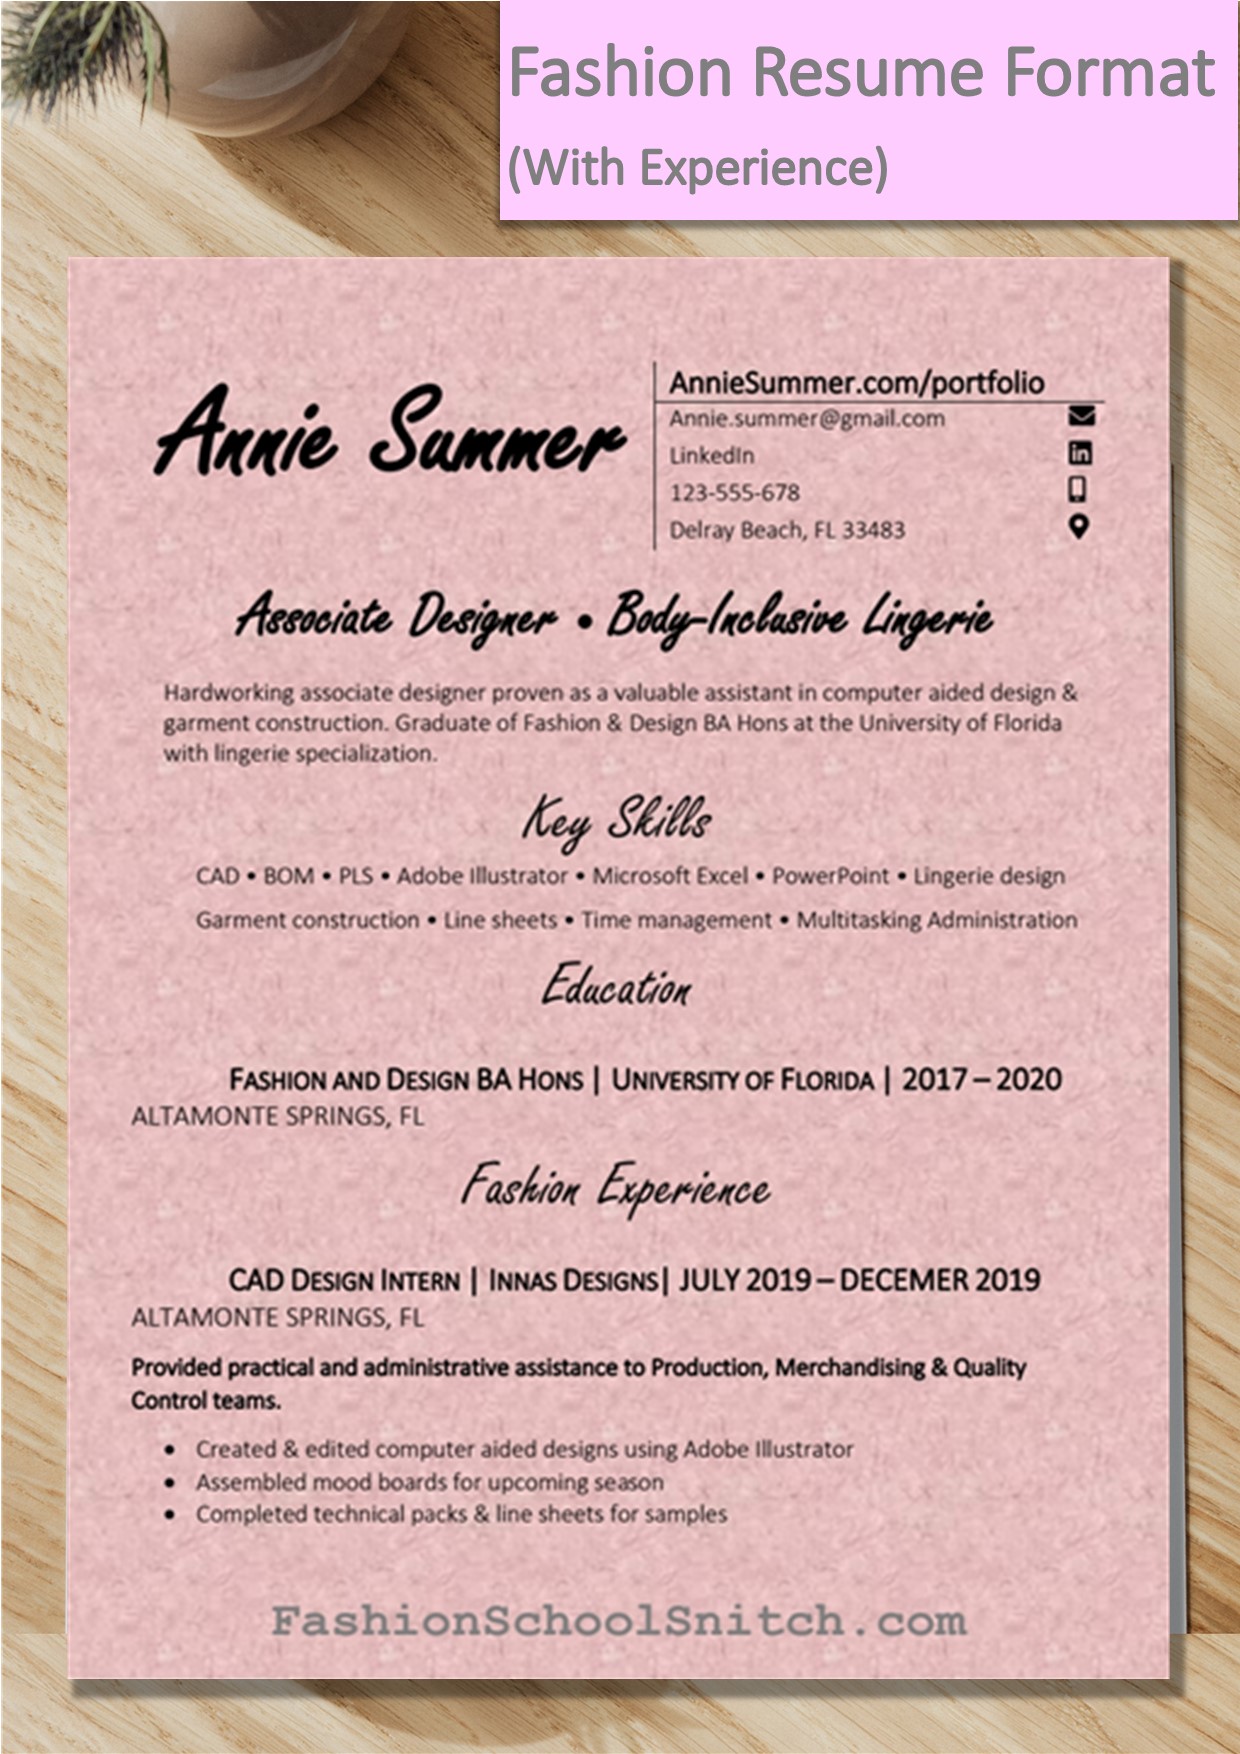 Sample: Fashion Designer resume format when you have relevant experience